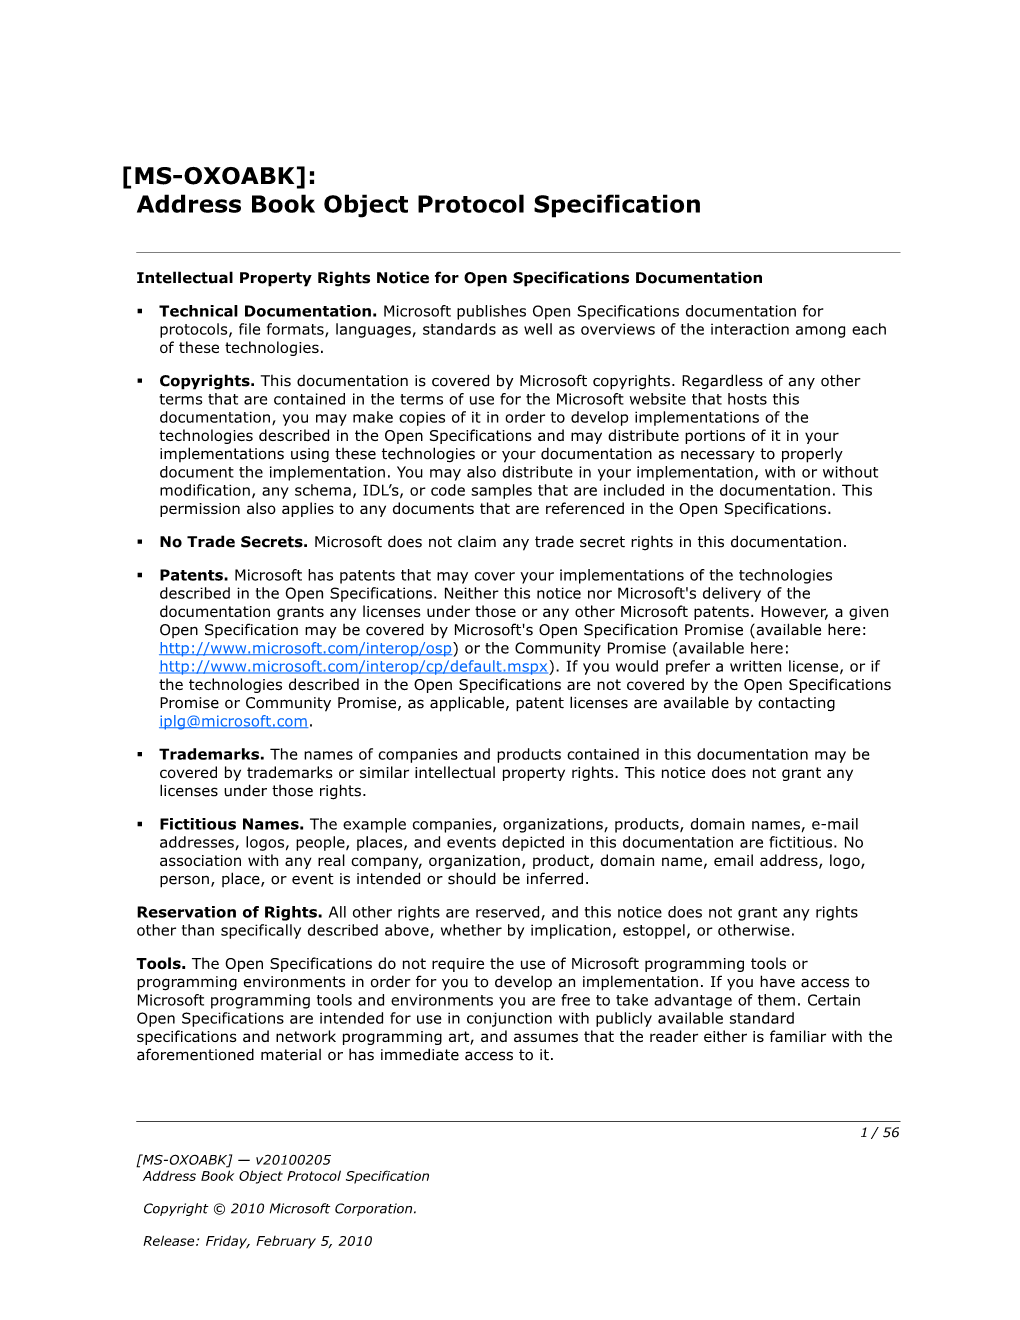 Intellectual Property Rights Notice for Open Specifications Documentation s52